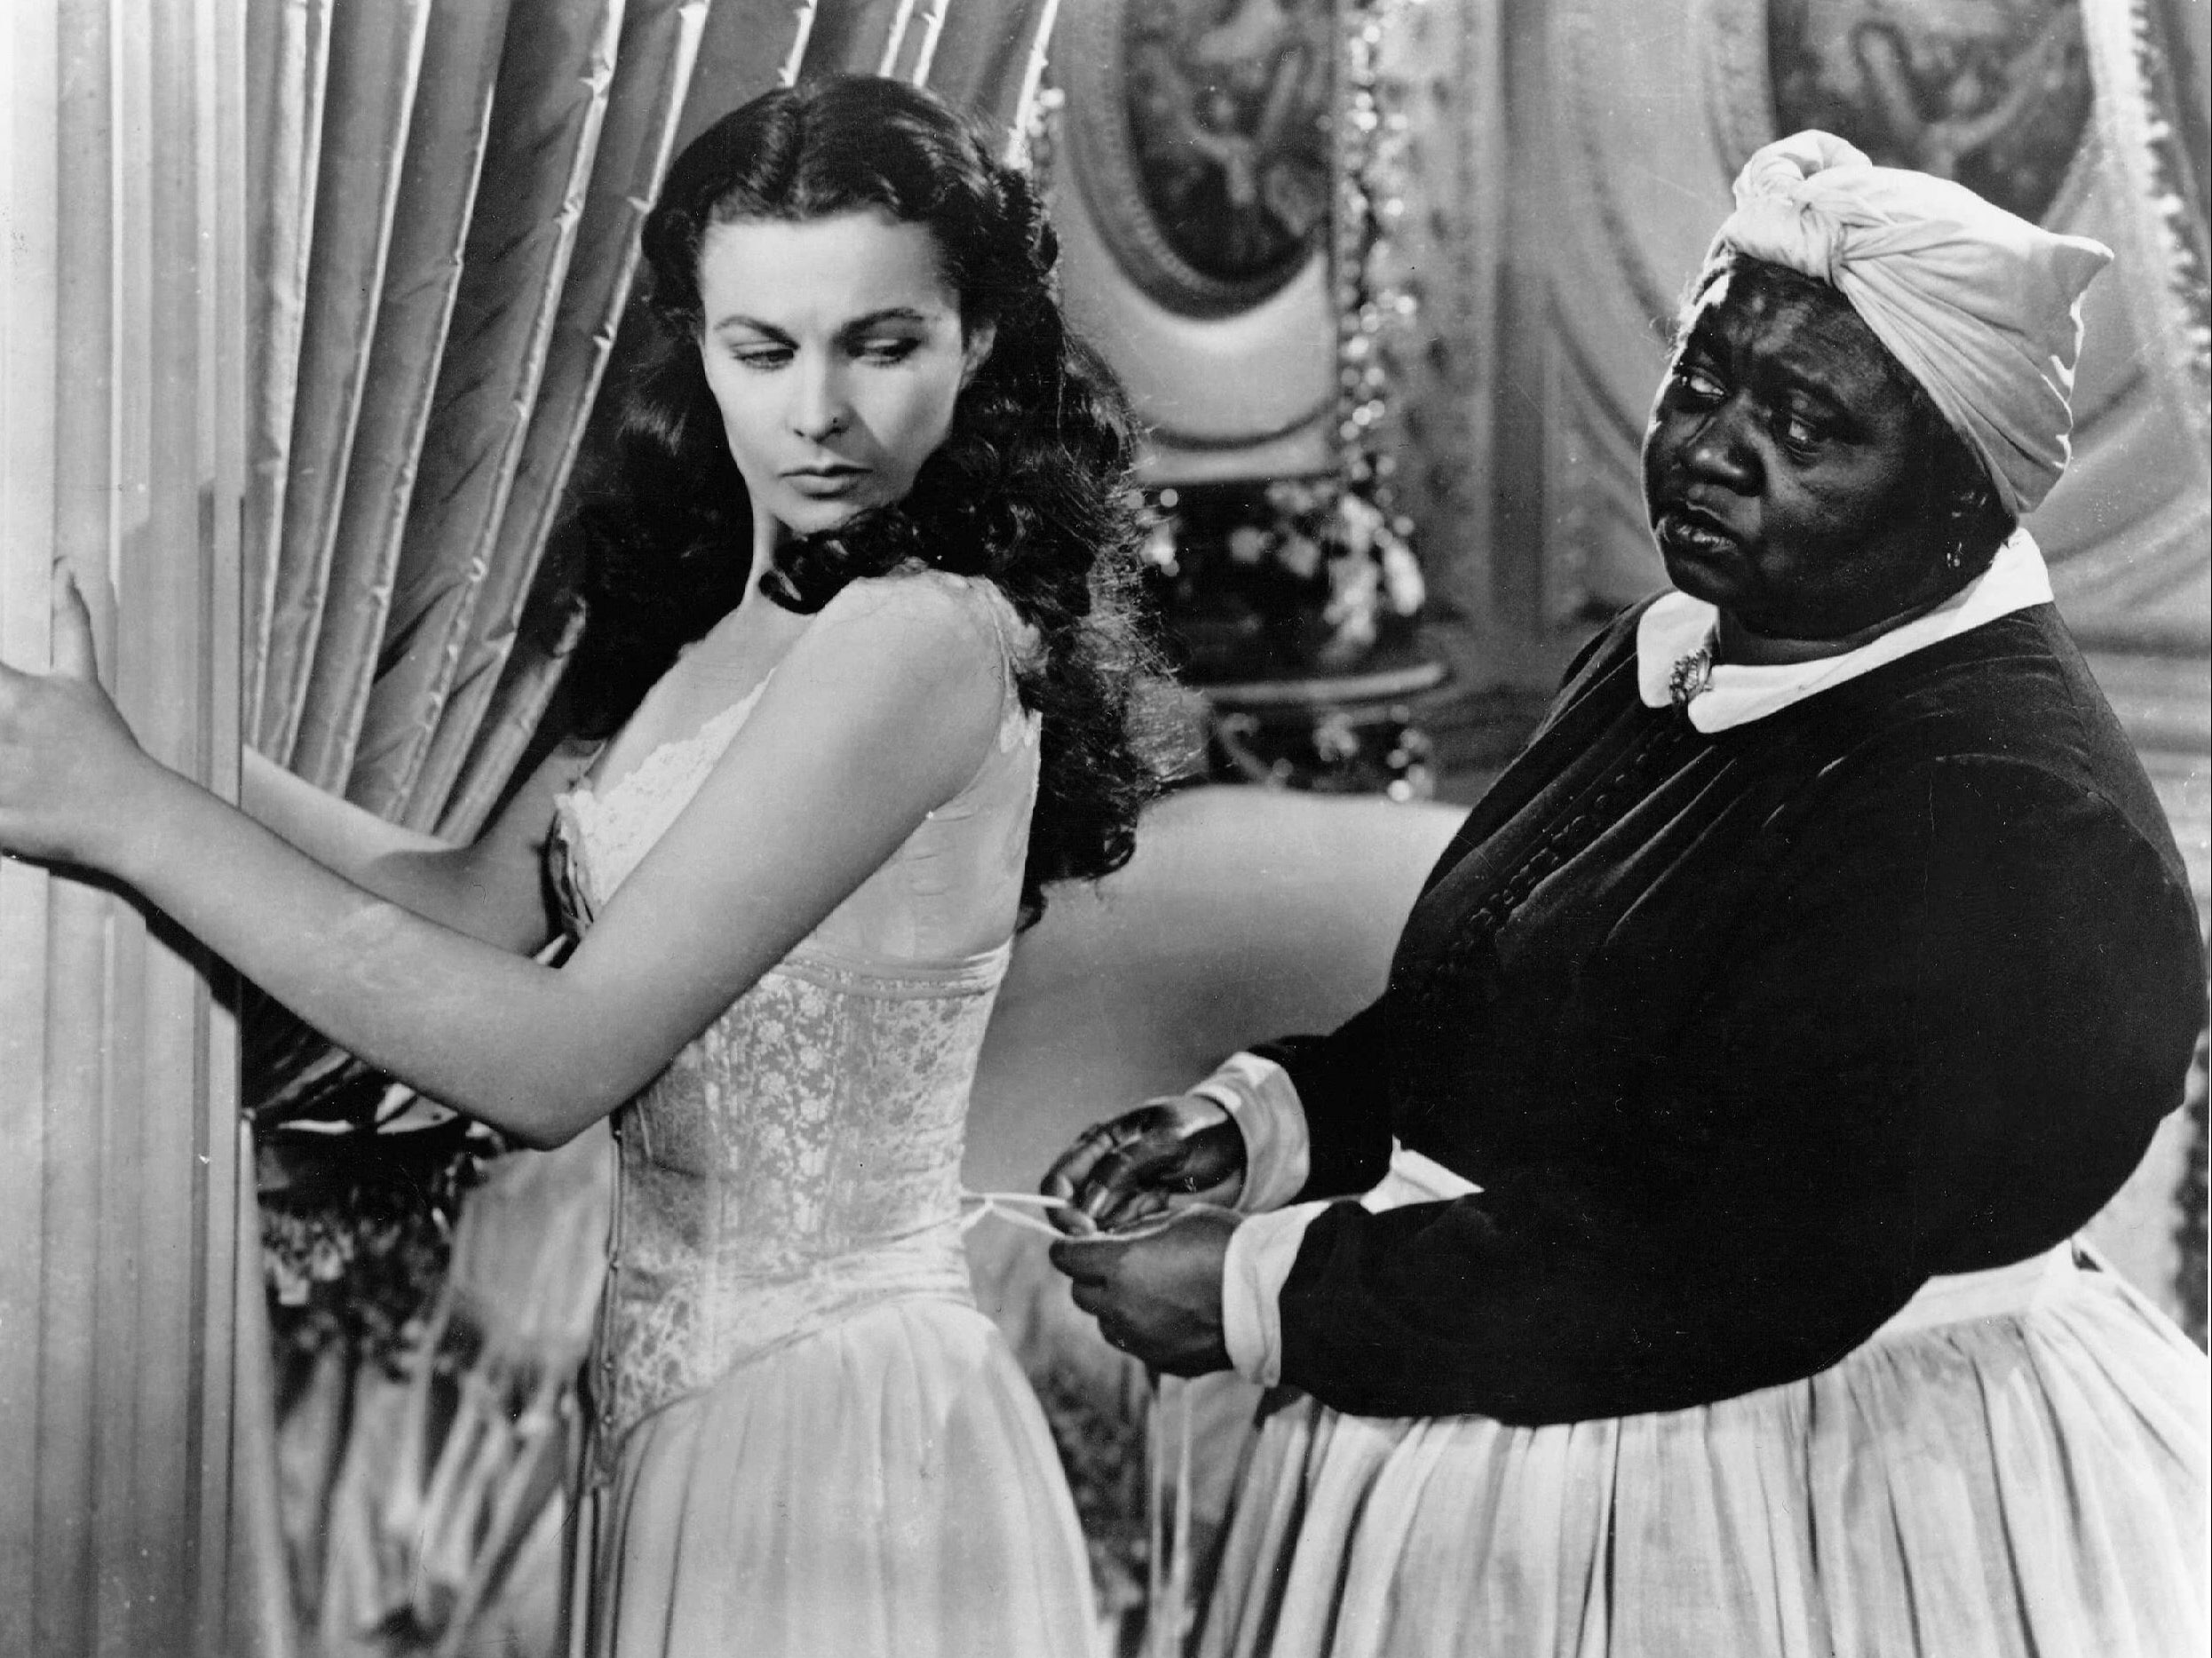 Vivien Leigh and Hattie McDaniel in ‘Gone With the Wind’